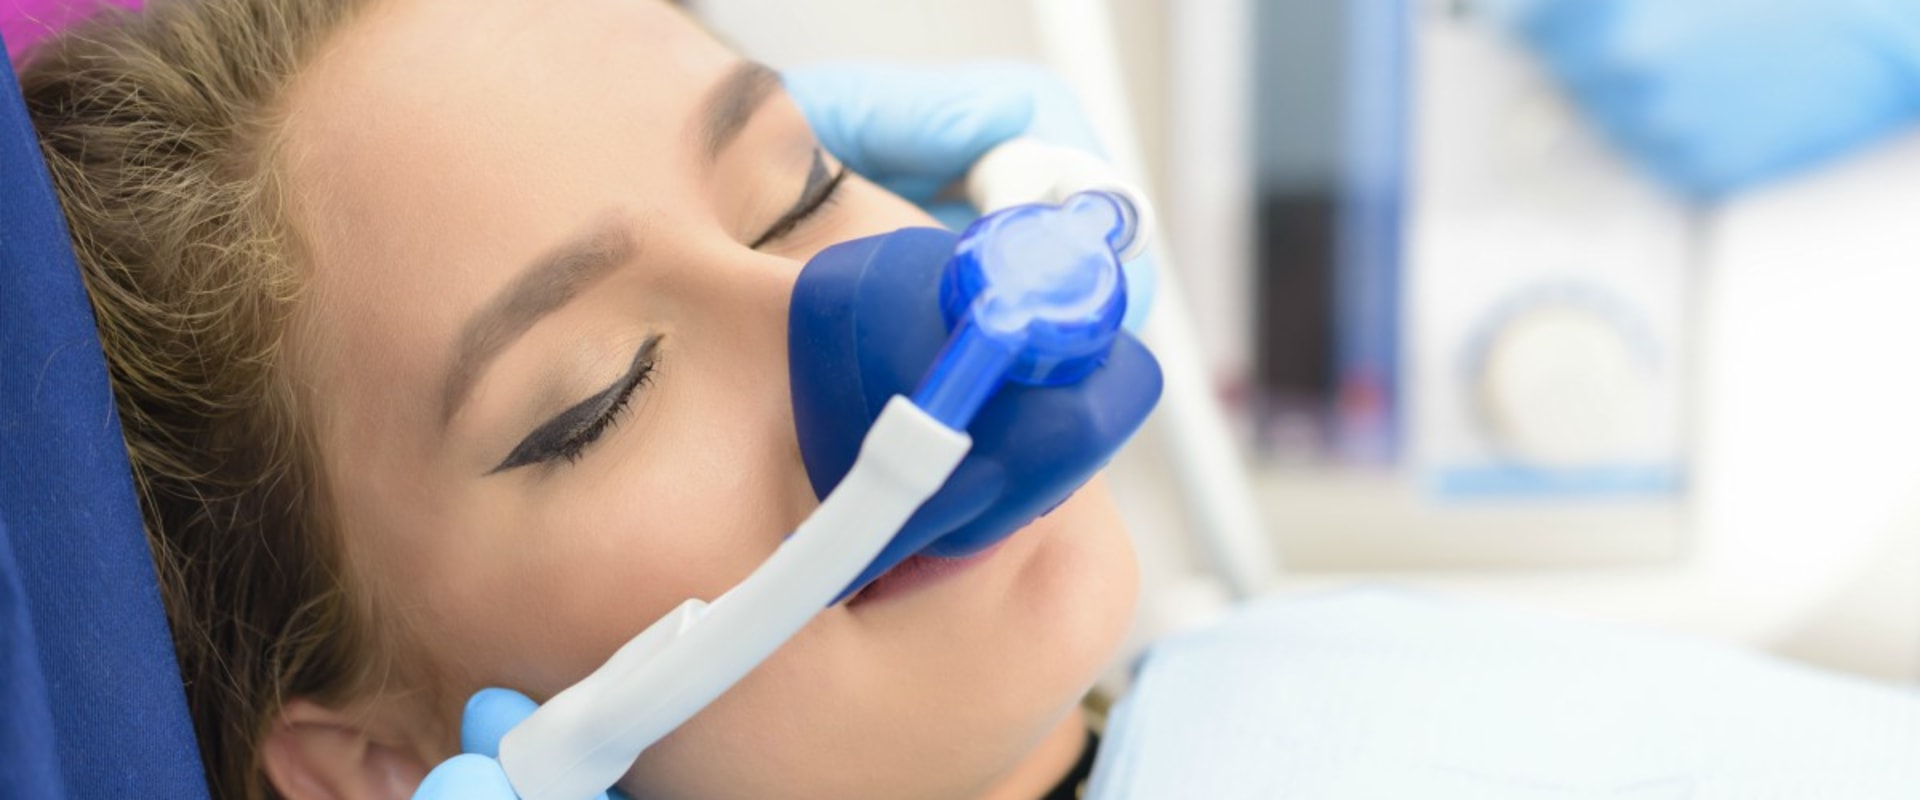 Understanding Pain and Discomfort Management for Sedation Dentistry